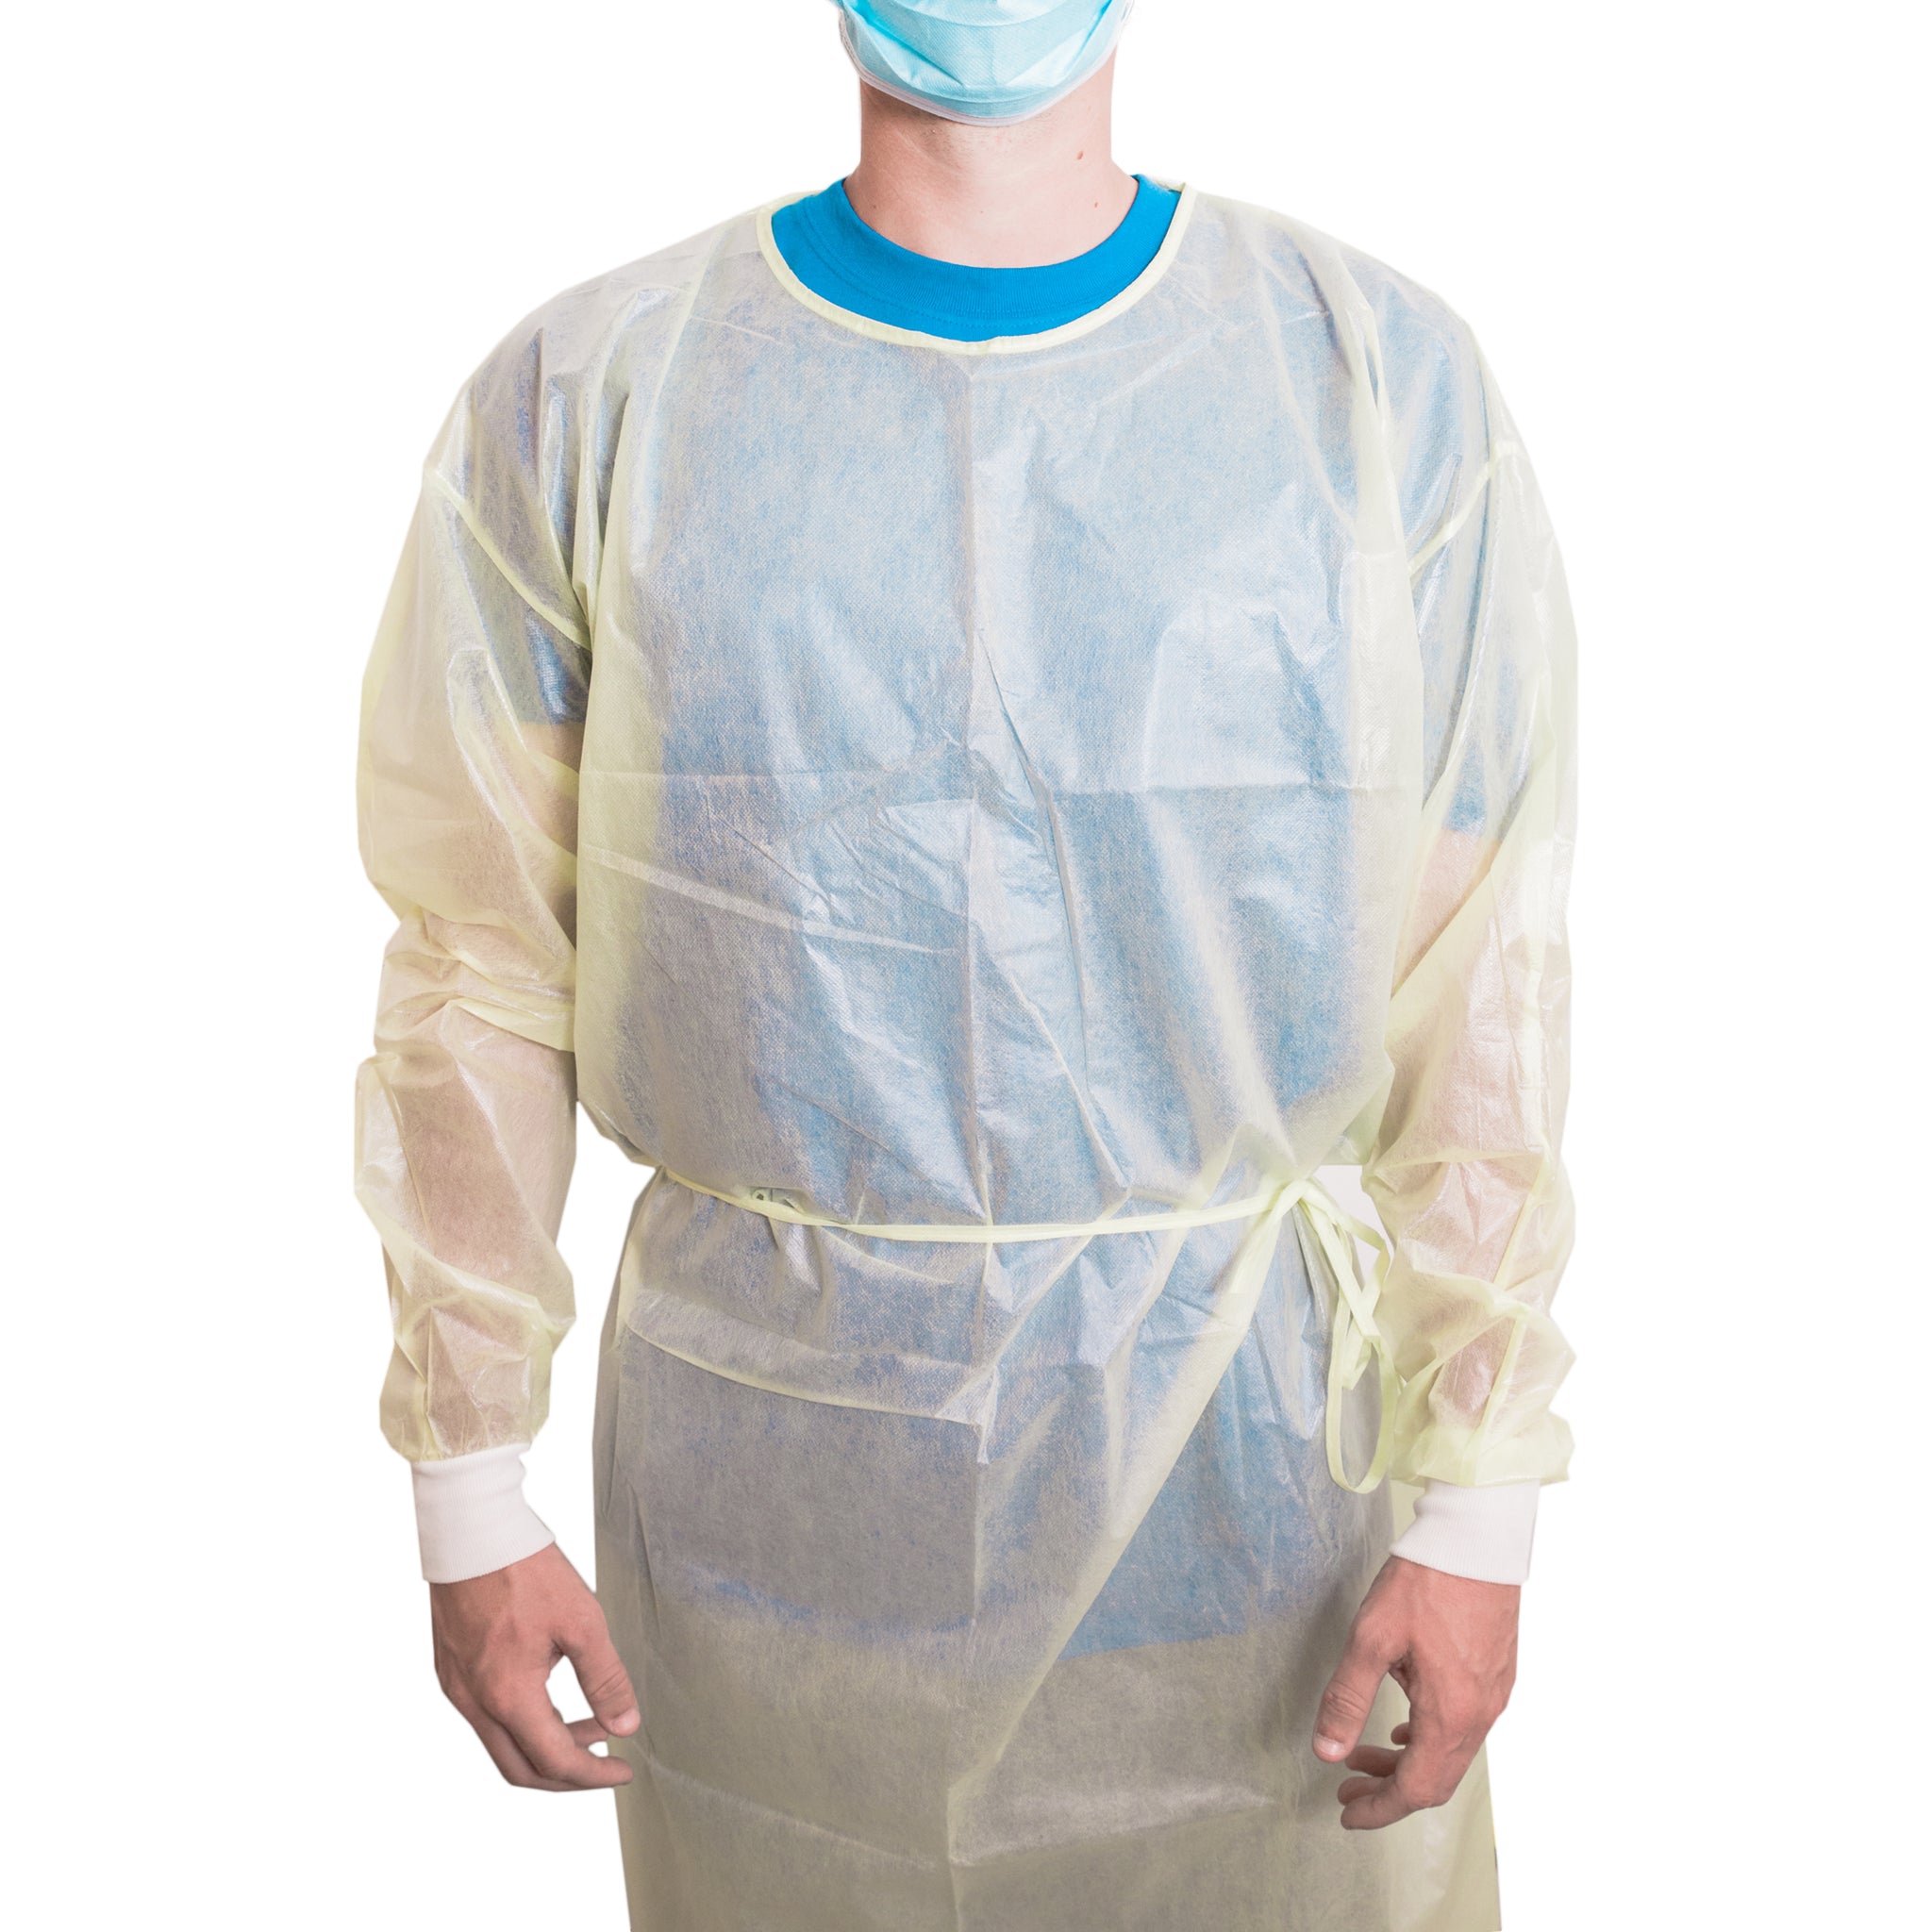 AAMI Level 3 Standard Surgical Gown_bgecare